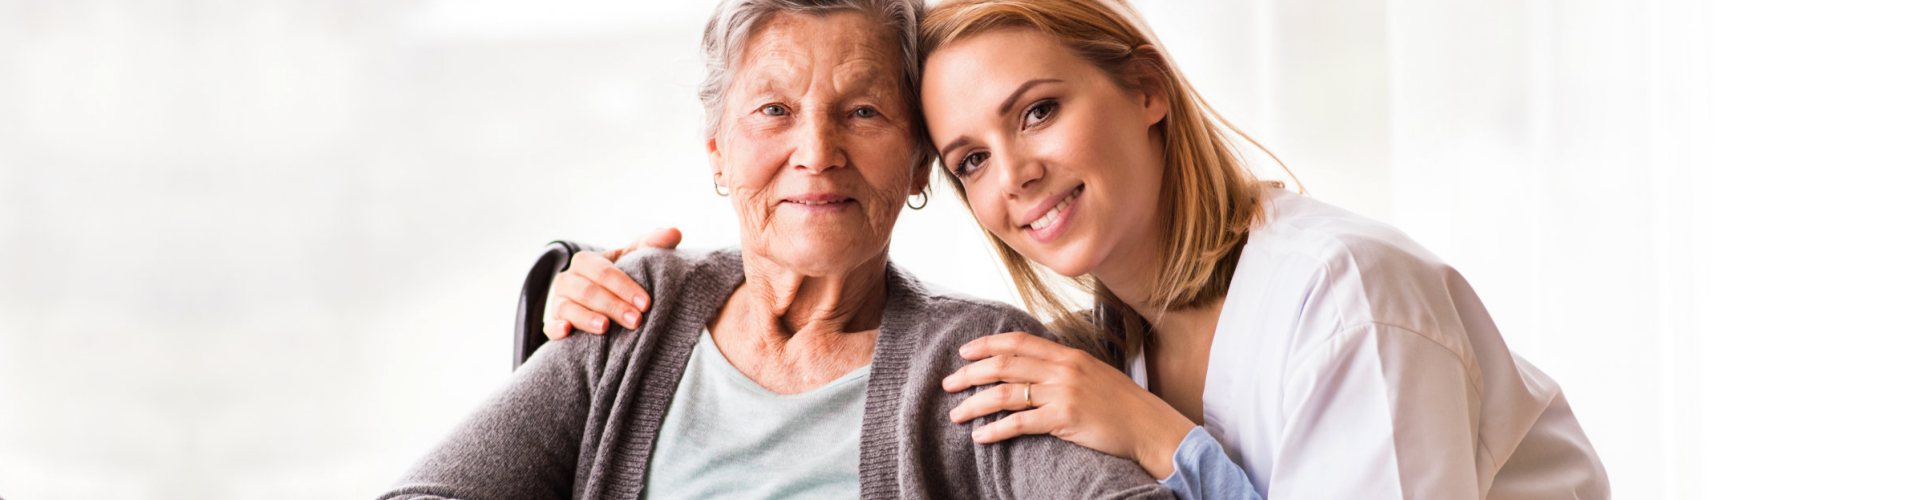 elderly woman smiling with caregiver